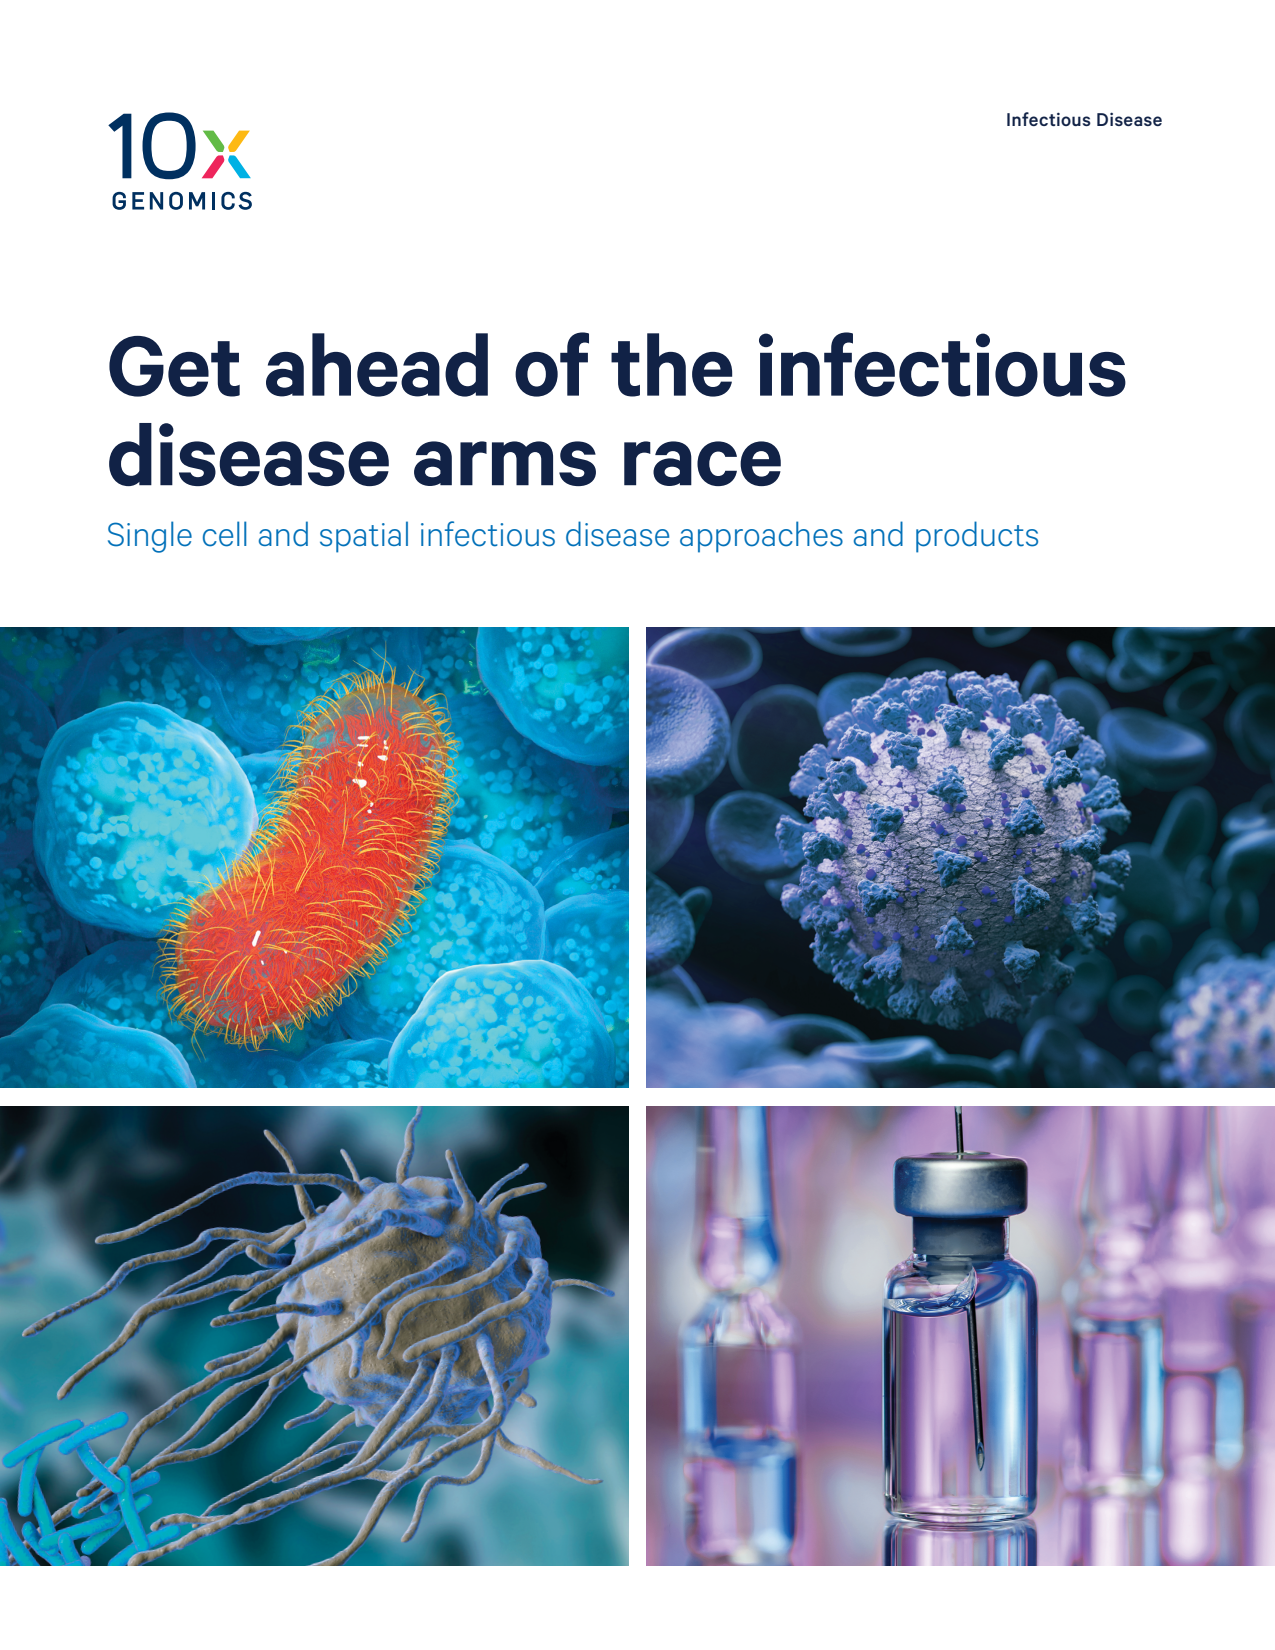 Infectious Disease Brochure: Get ahead of the infectious disease arms race